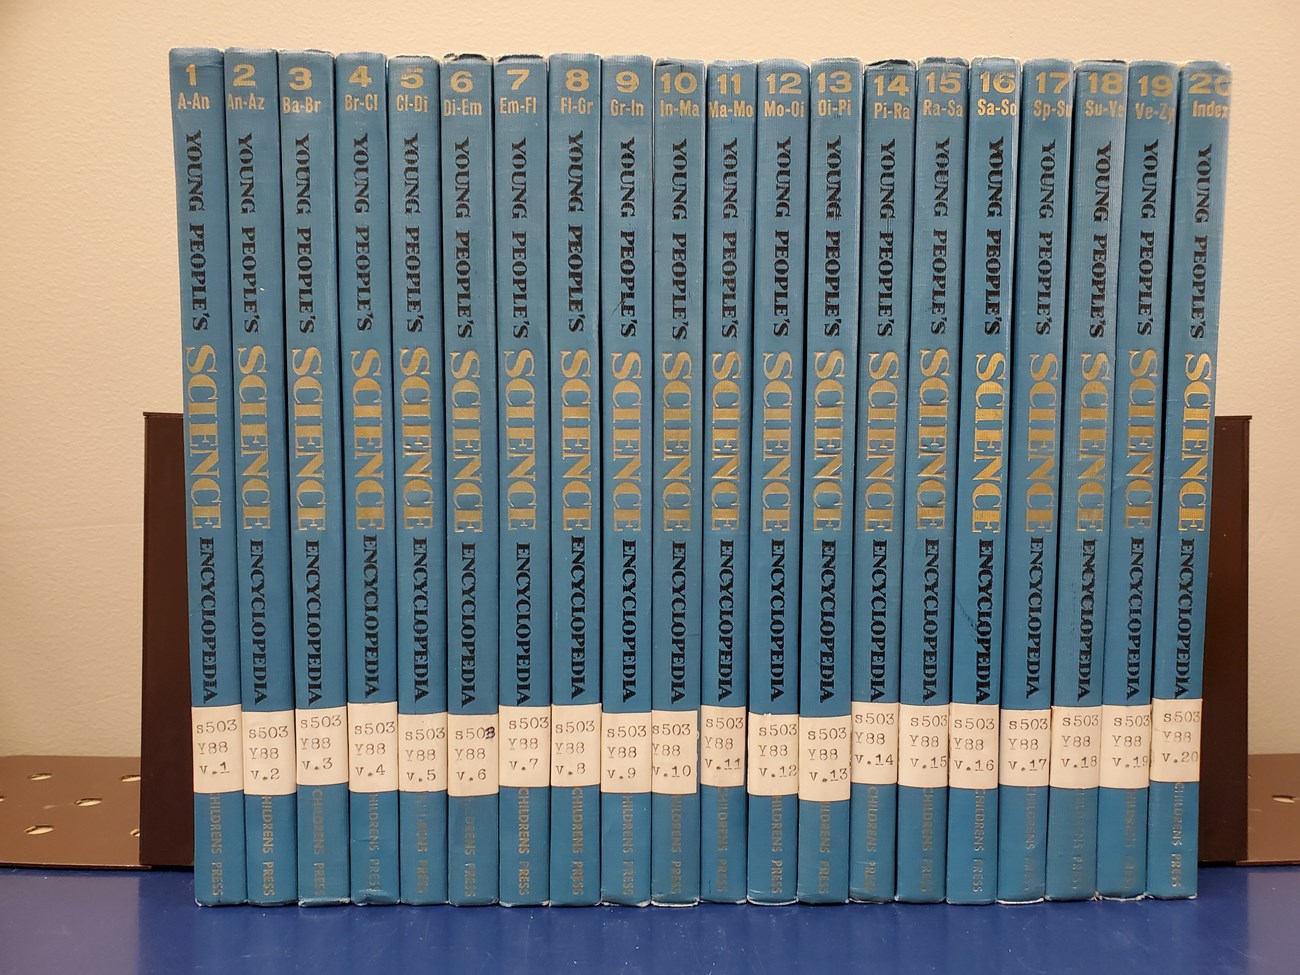 An encyclopedia set from the 1960s. The books are blue, and the spine reads Young People's Science Encyclopedia.